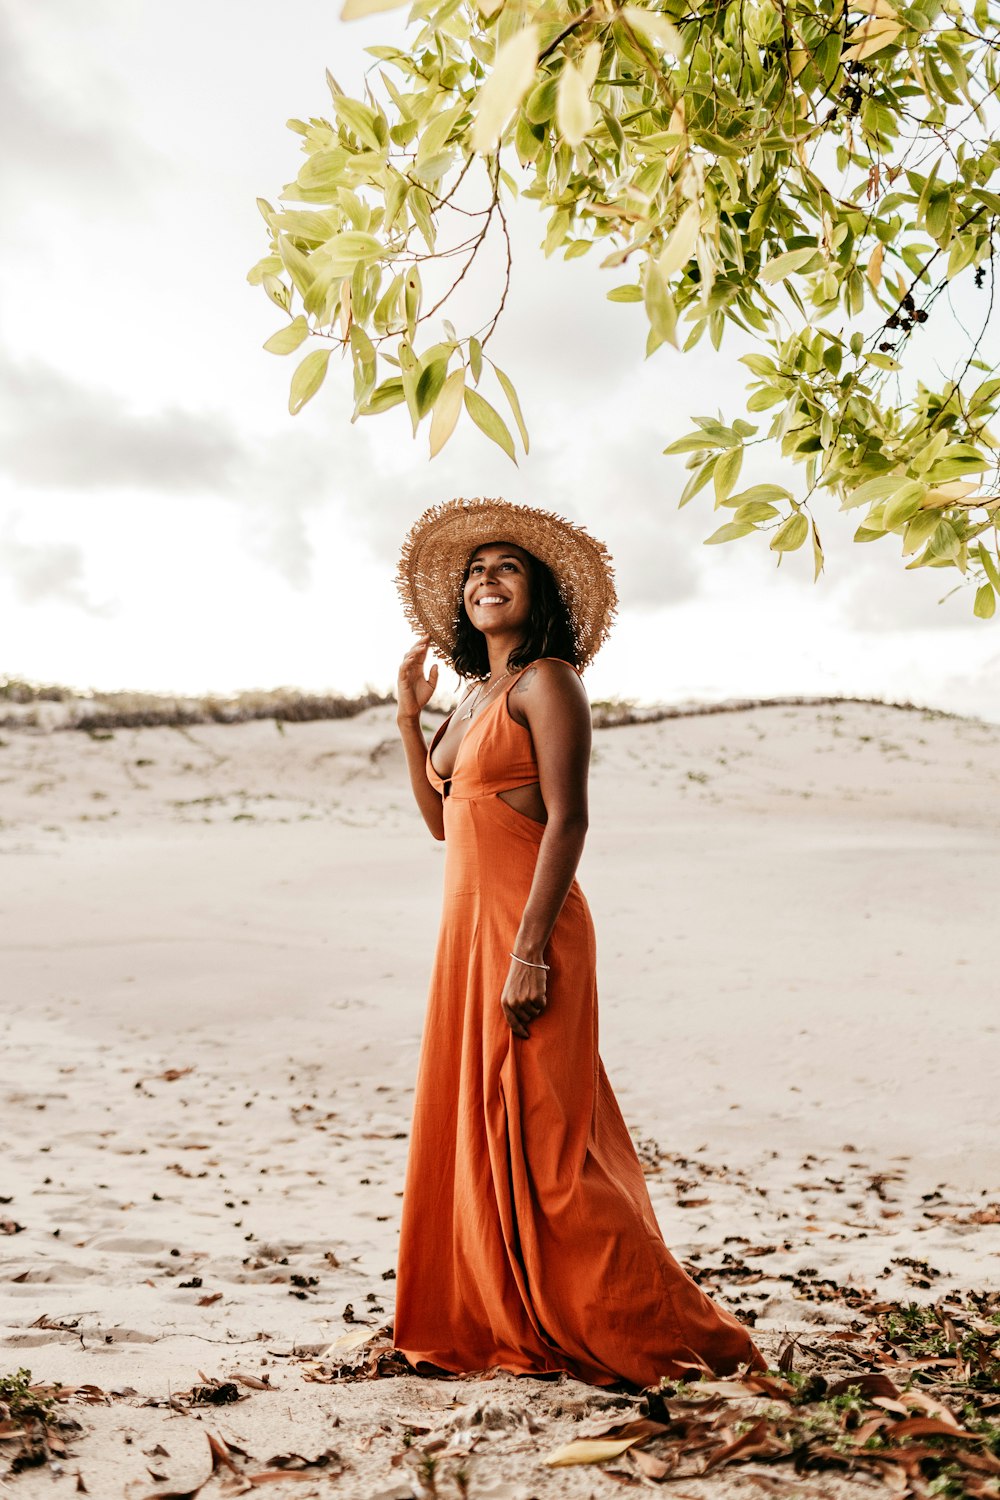 Beach Dress Pictures | Download Free Images on Unsplash